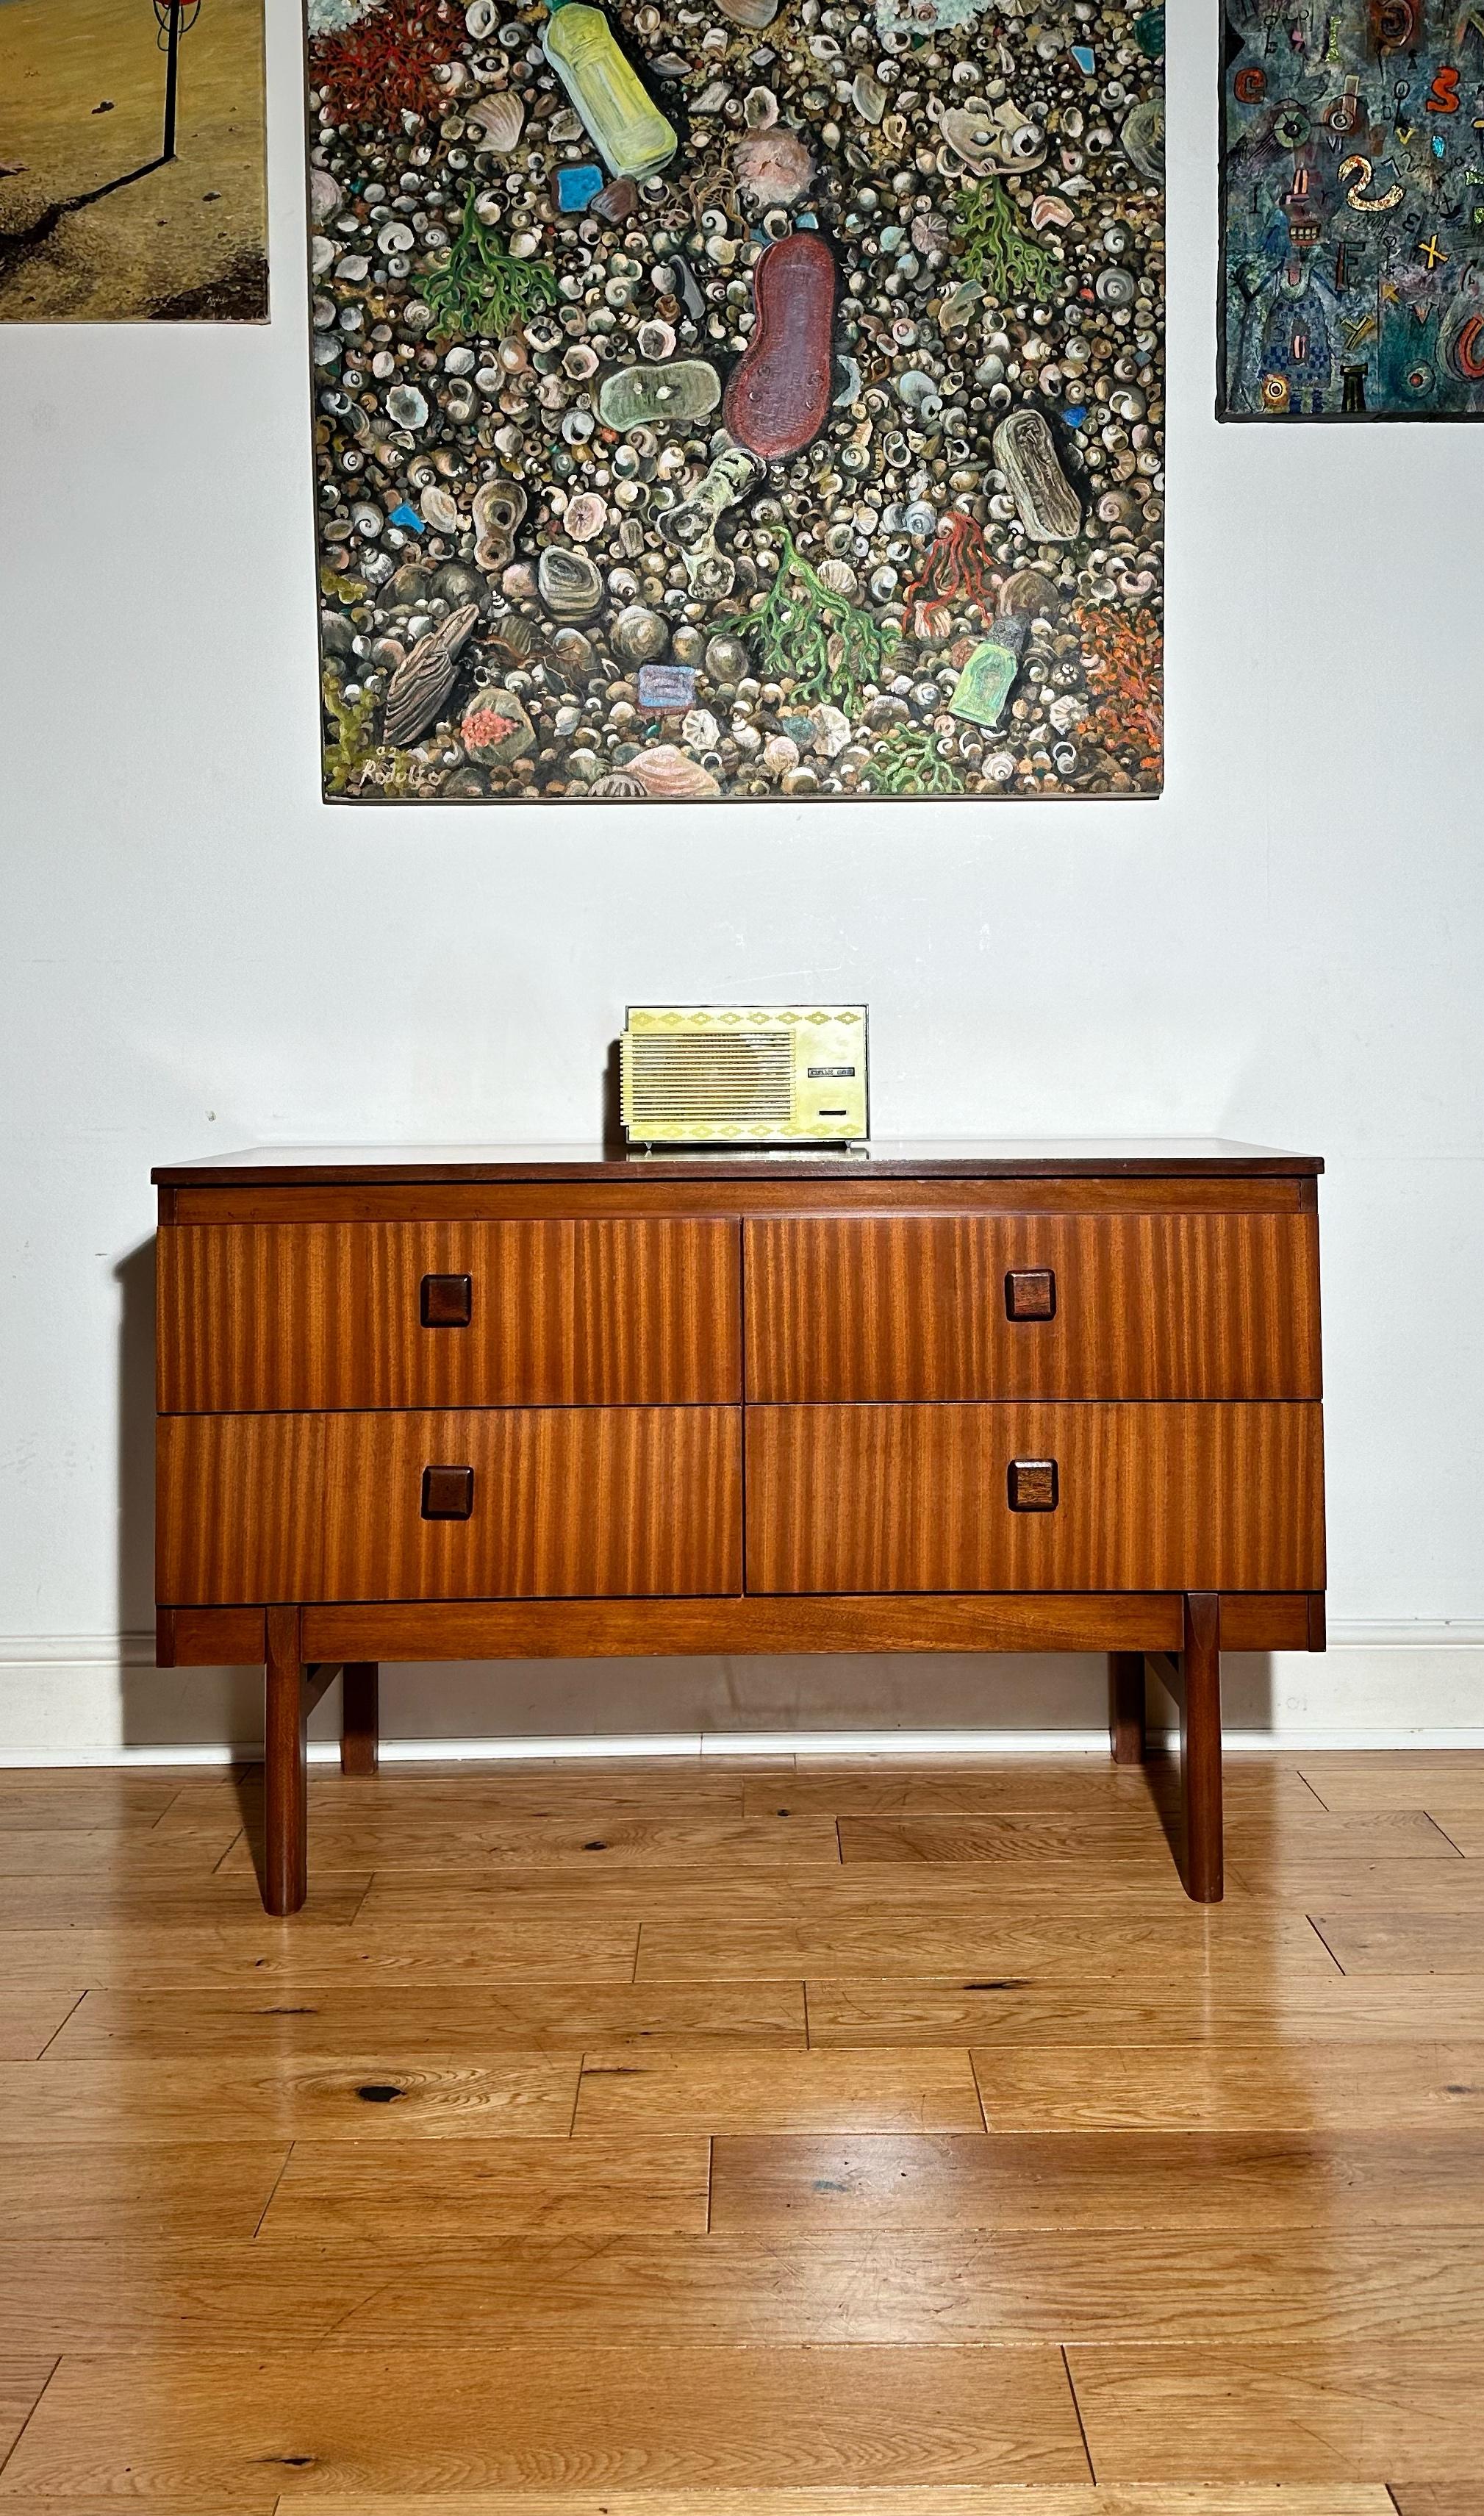 We’re happy to provide our own competitive shipping quotes with trusted couriers. Please message us with your postcode for a more accurate price. Thank you.

Mid Century Modern teak double chest of drawers / small sideboard by Remploy.
It features